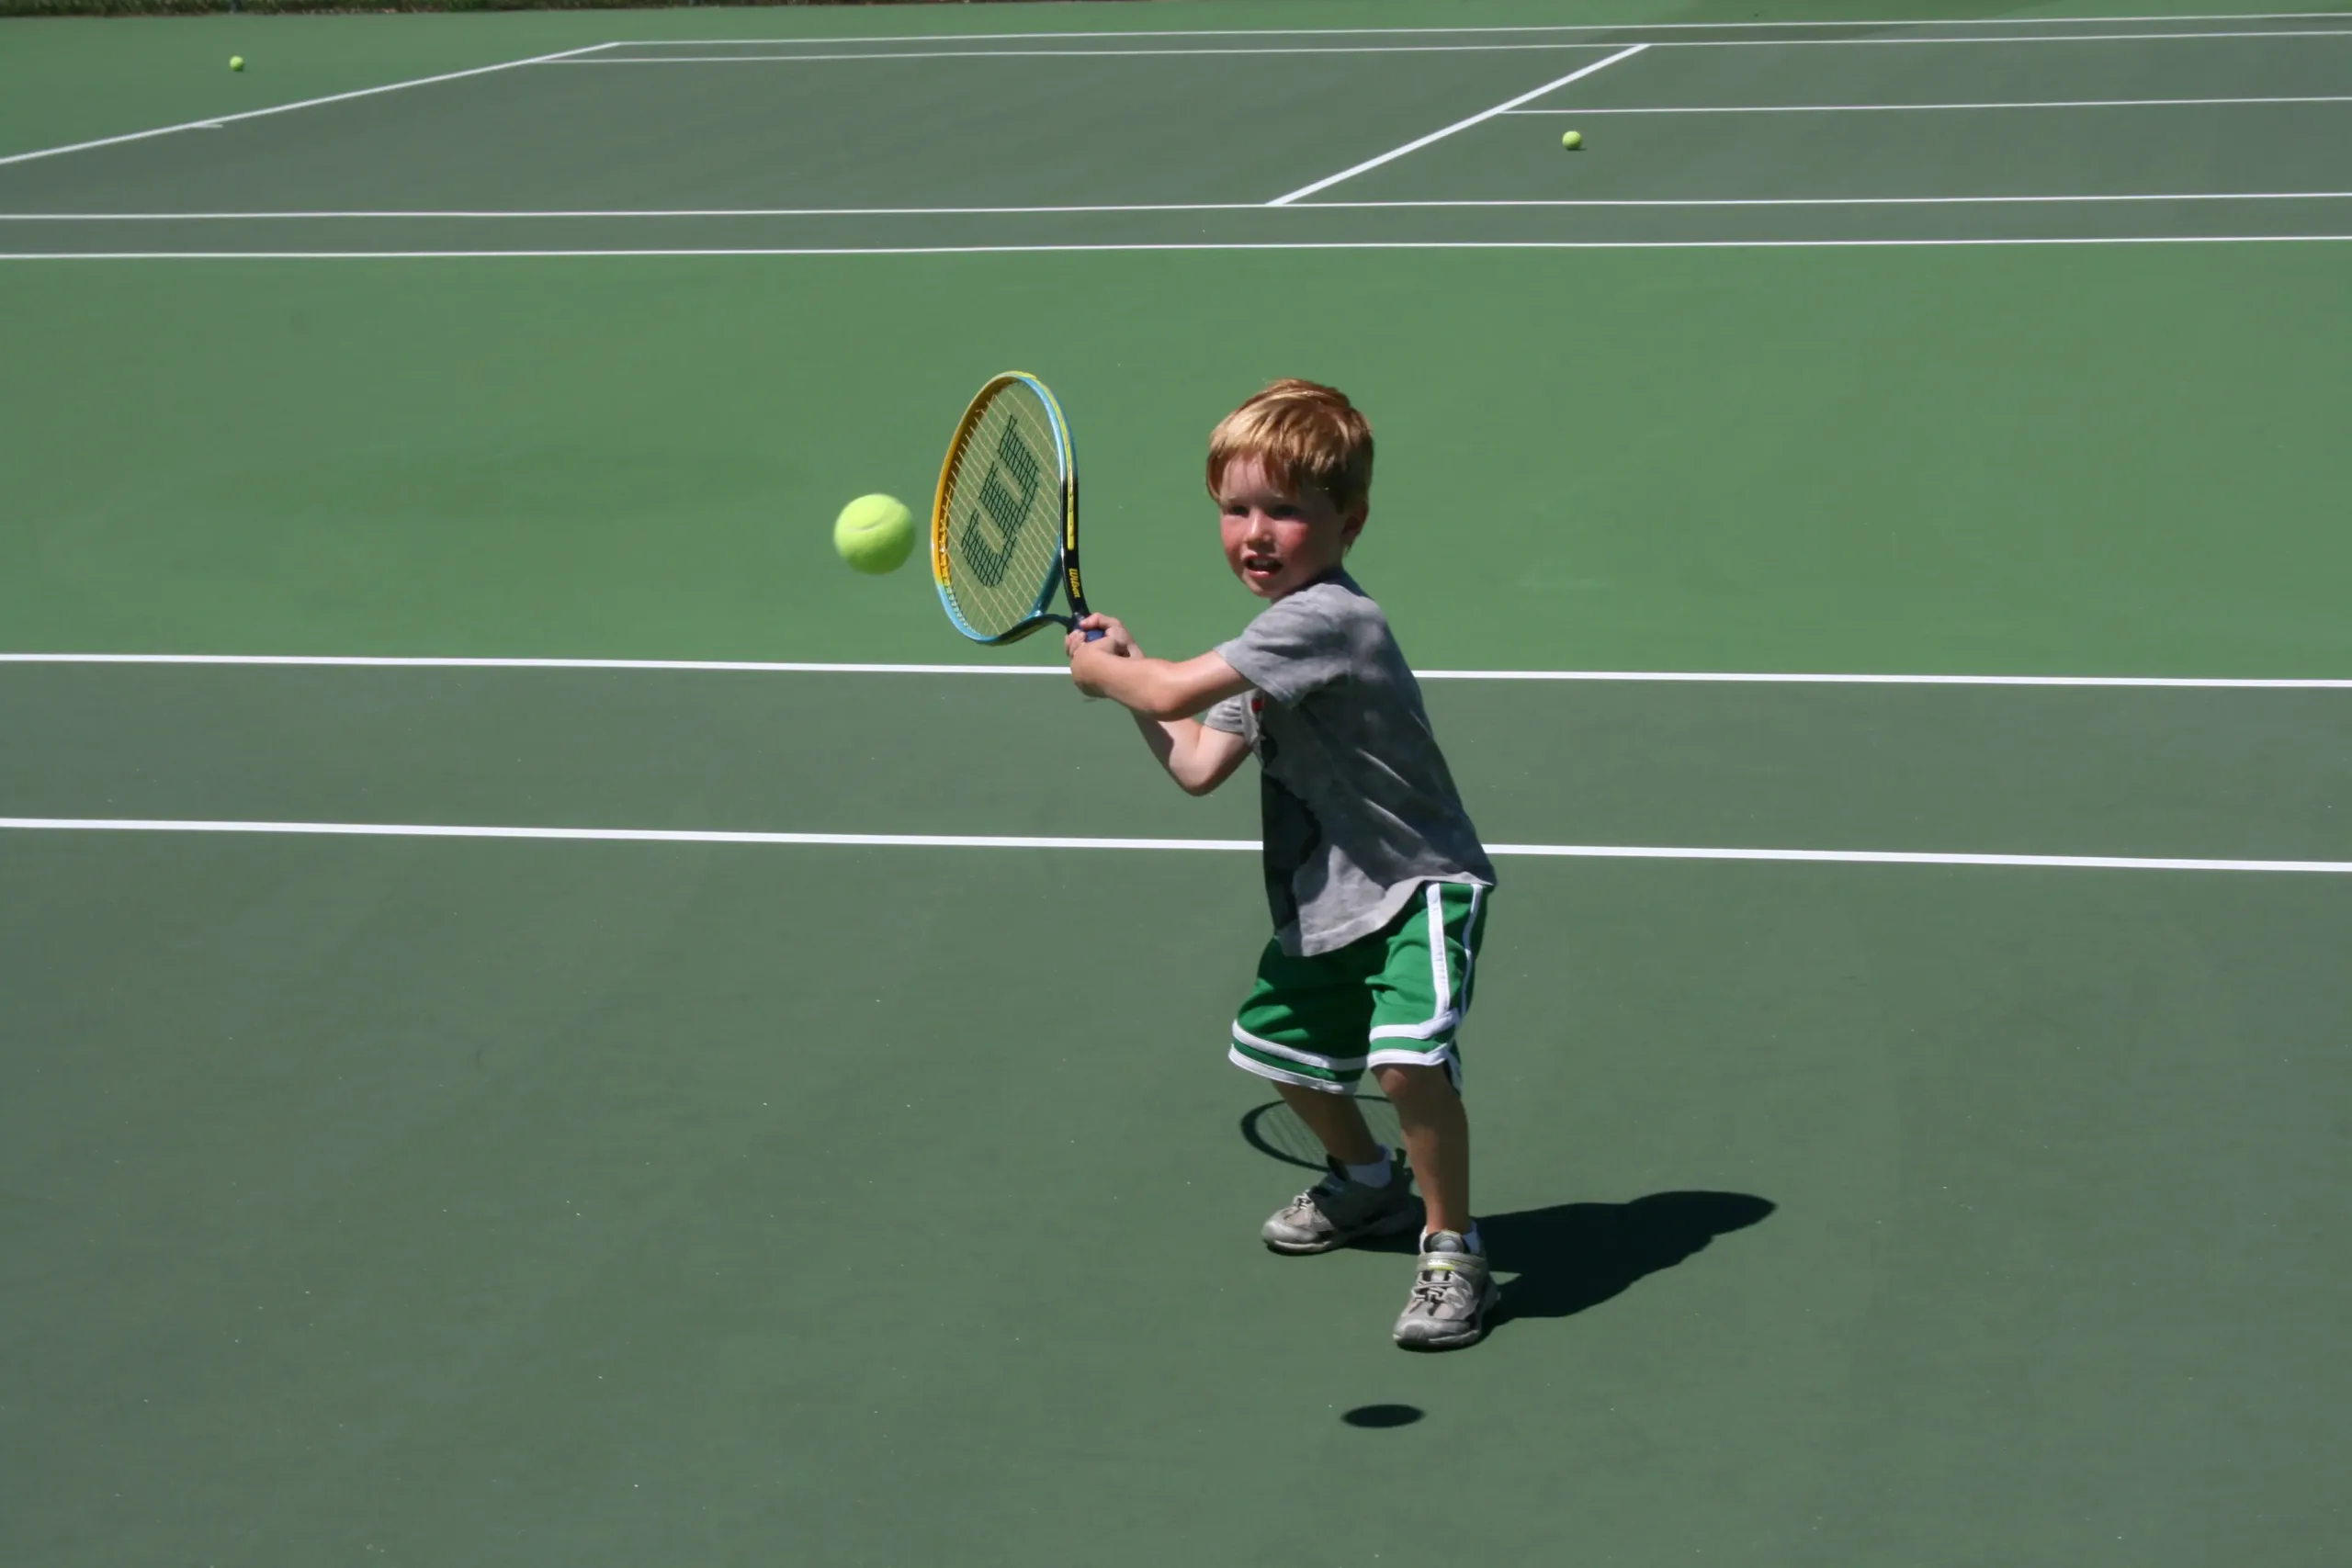 Finn Moynahan, 5, benefiting from the fitness program for toddlers at Soundview Sports Camp.